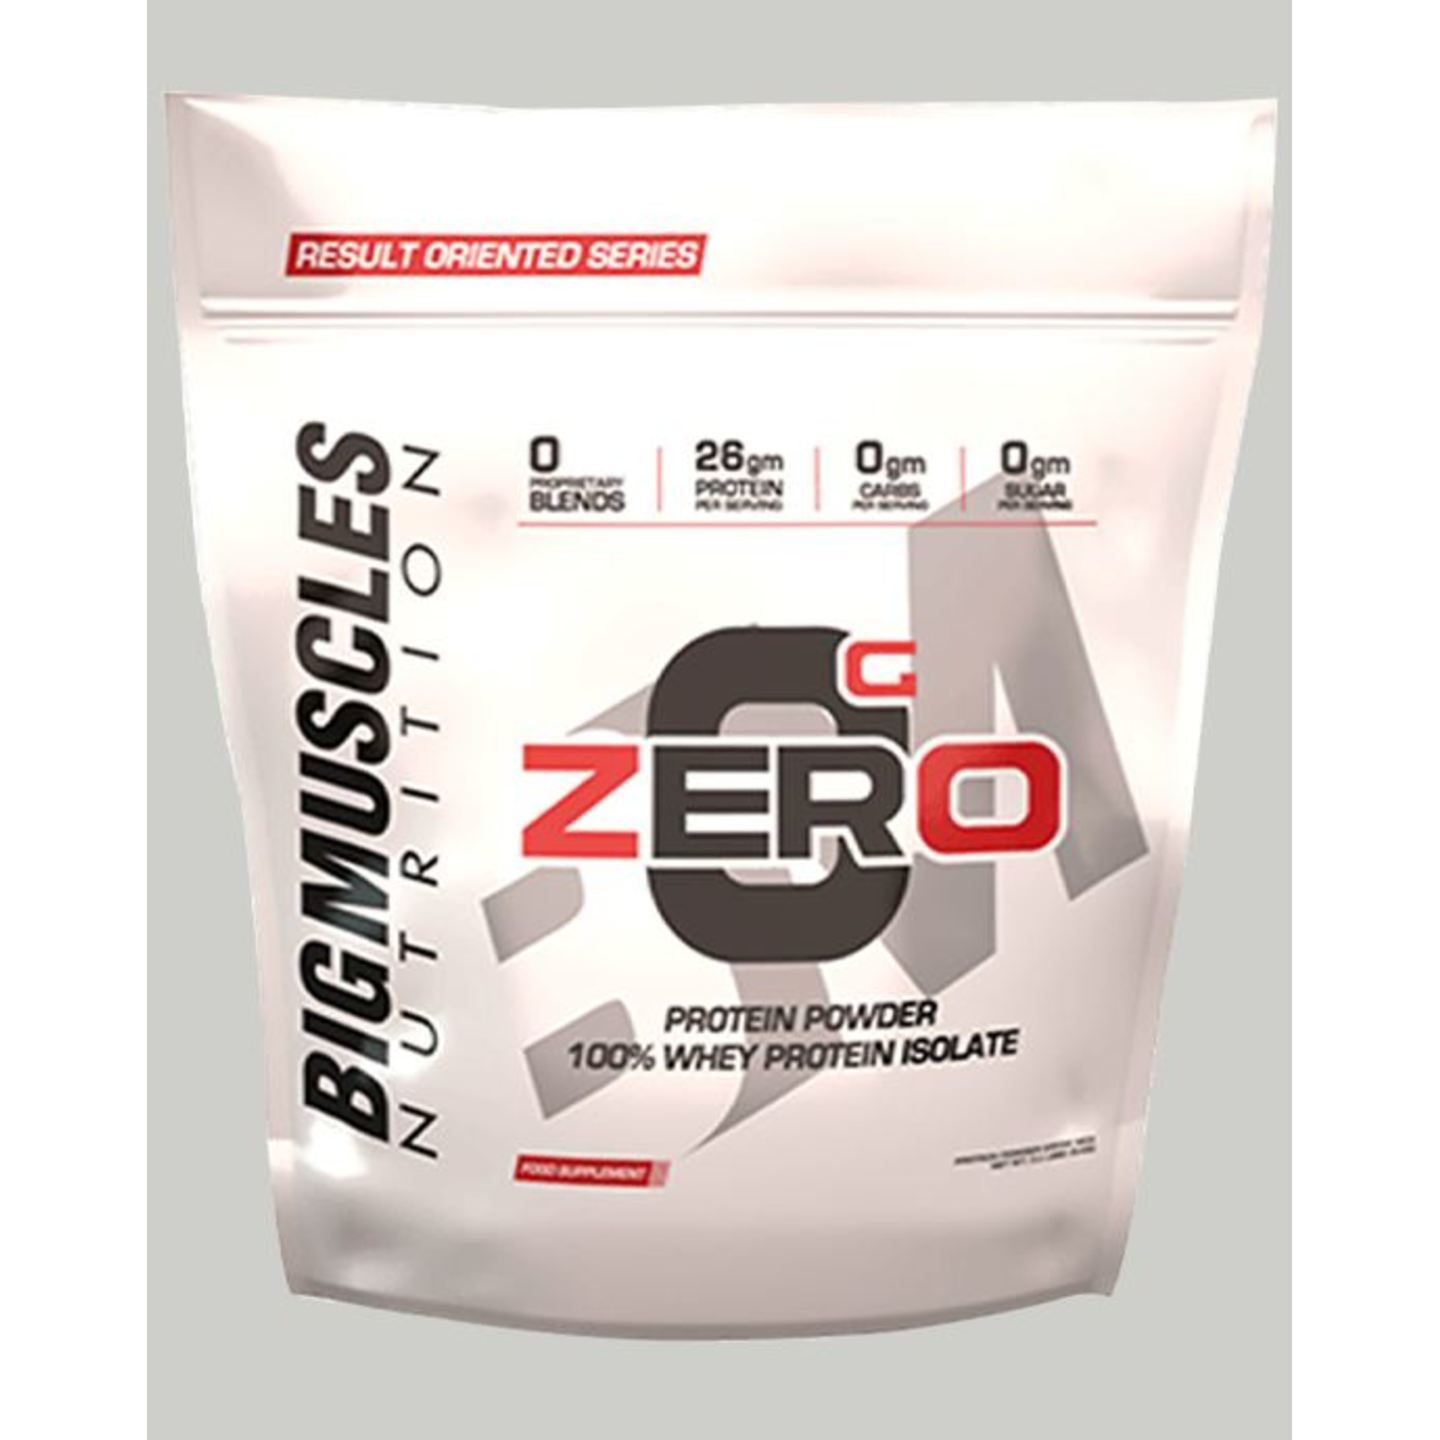 MastMart Bigmuscles Nutrition ZERO Protein Powder from 100 Whey Isolate Rich Chocolate 9 lbs